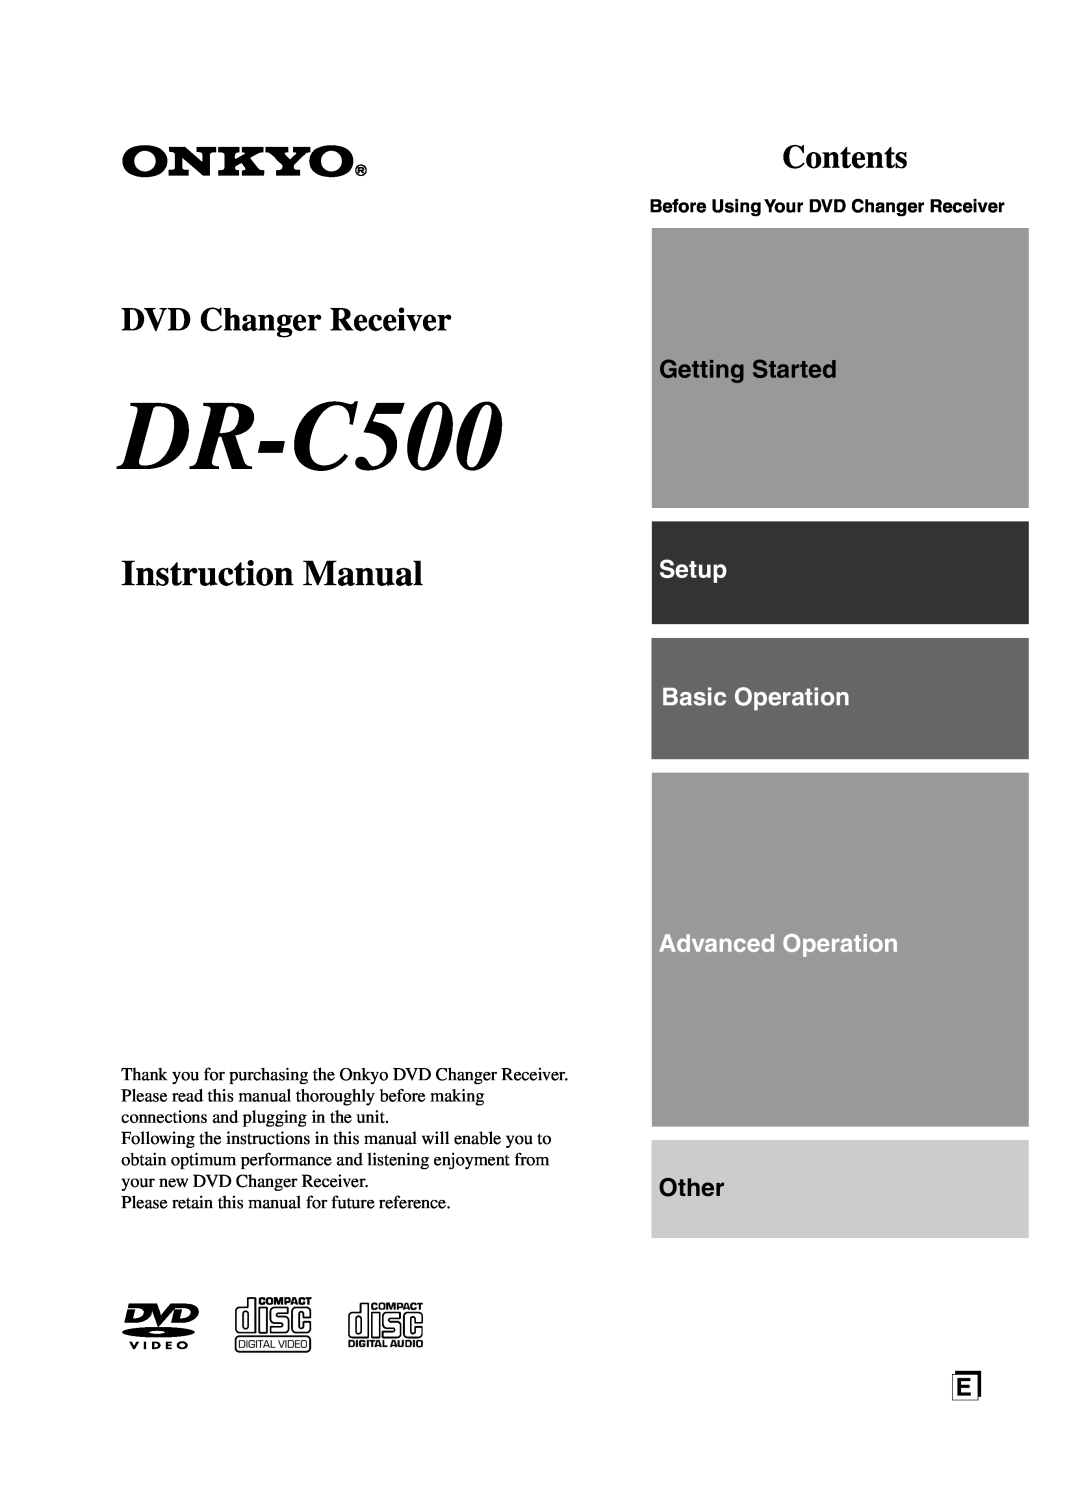 Onkyo DR-C500 instruction manual Contents, Before Using Your DVD Changer Receiver, Getting Started, Other 